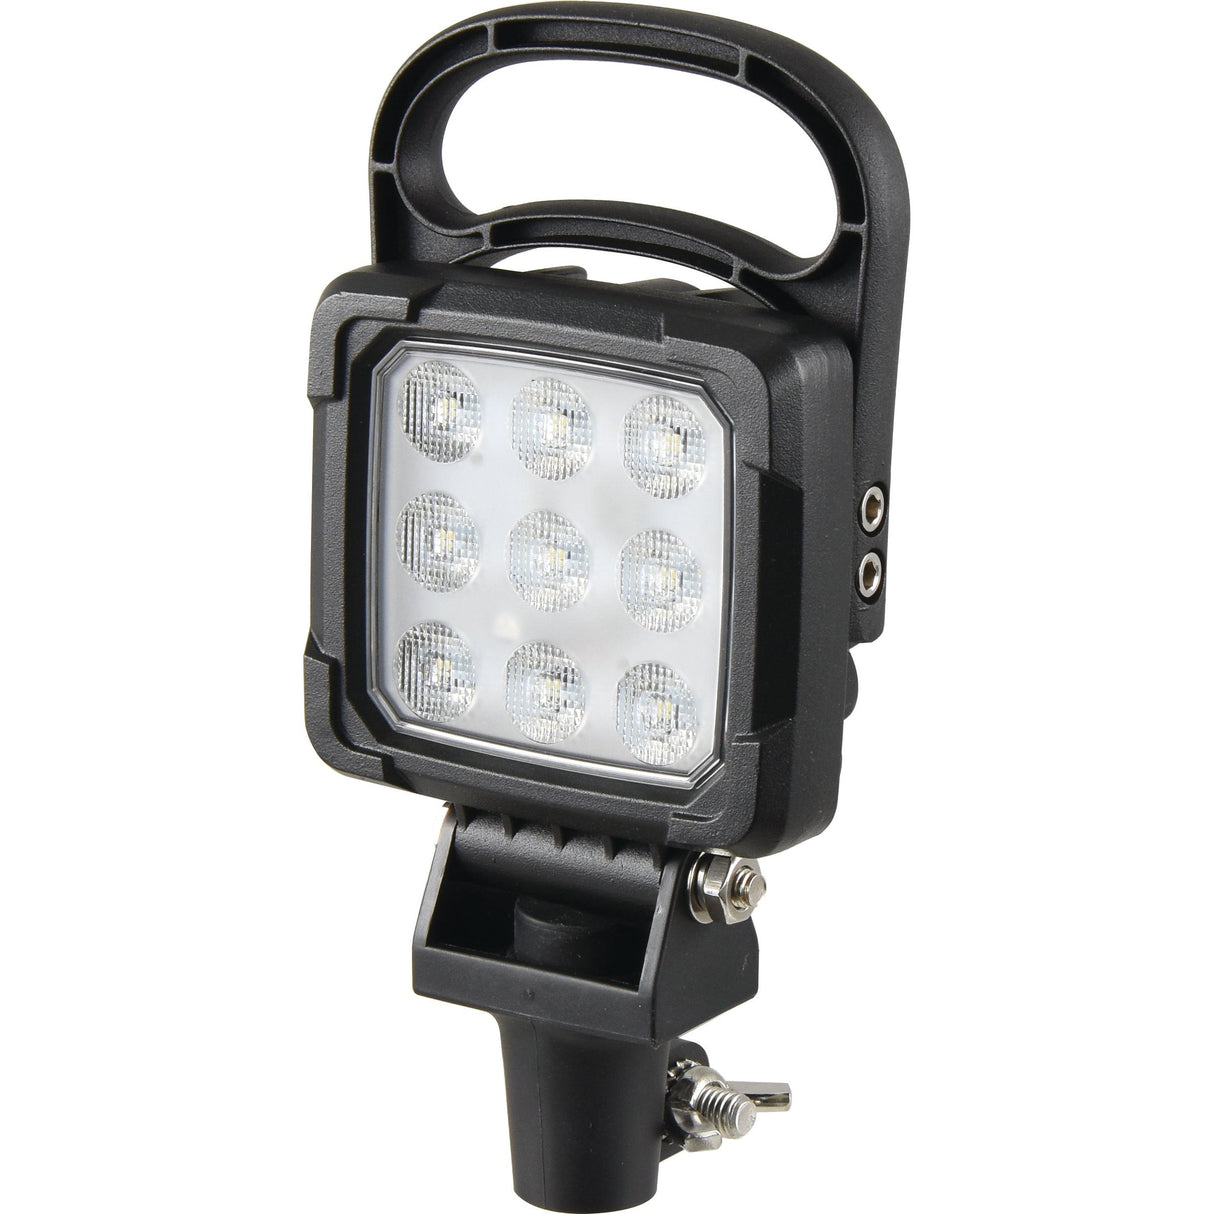 LED Work Light, Interference: Class 3, 2250 Lumens Raw, 10-30V ()
 - S.130542 - Farming Parts